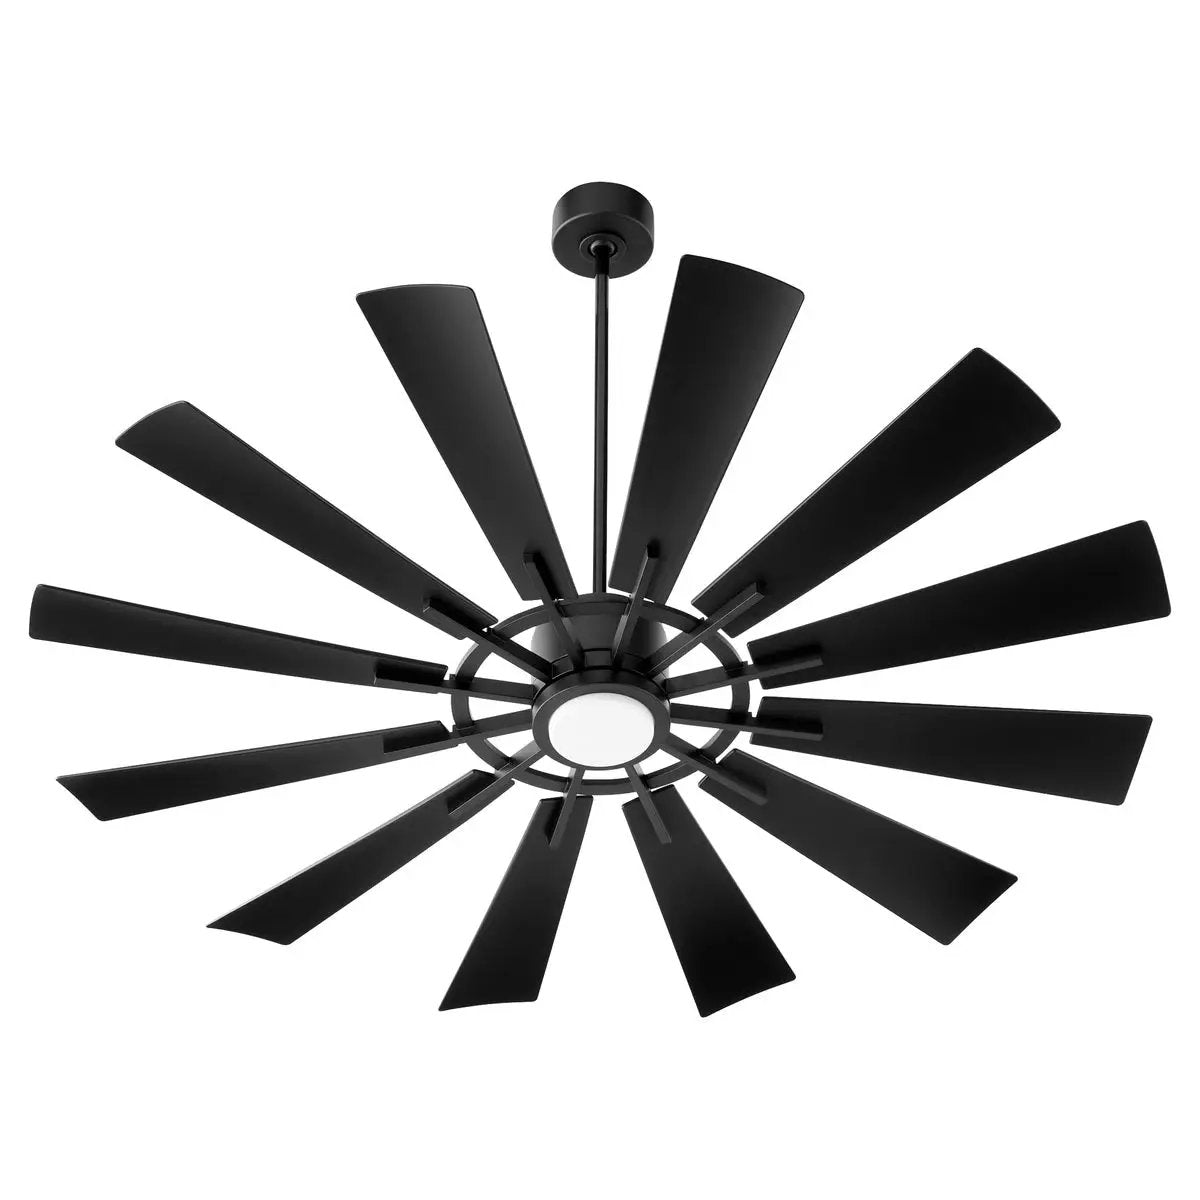 Outdoor Ceiling Fan with Light, featuring a multi-blade system attached to a dark chromatic housing motor and iron elements. Designed for high-performance outdoor air circulation. 6-speed options. UL Listed for damp locations. 12 blades, 60&quot; span, 14-degree pitch. LED lamp included.